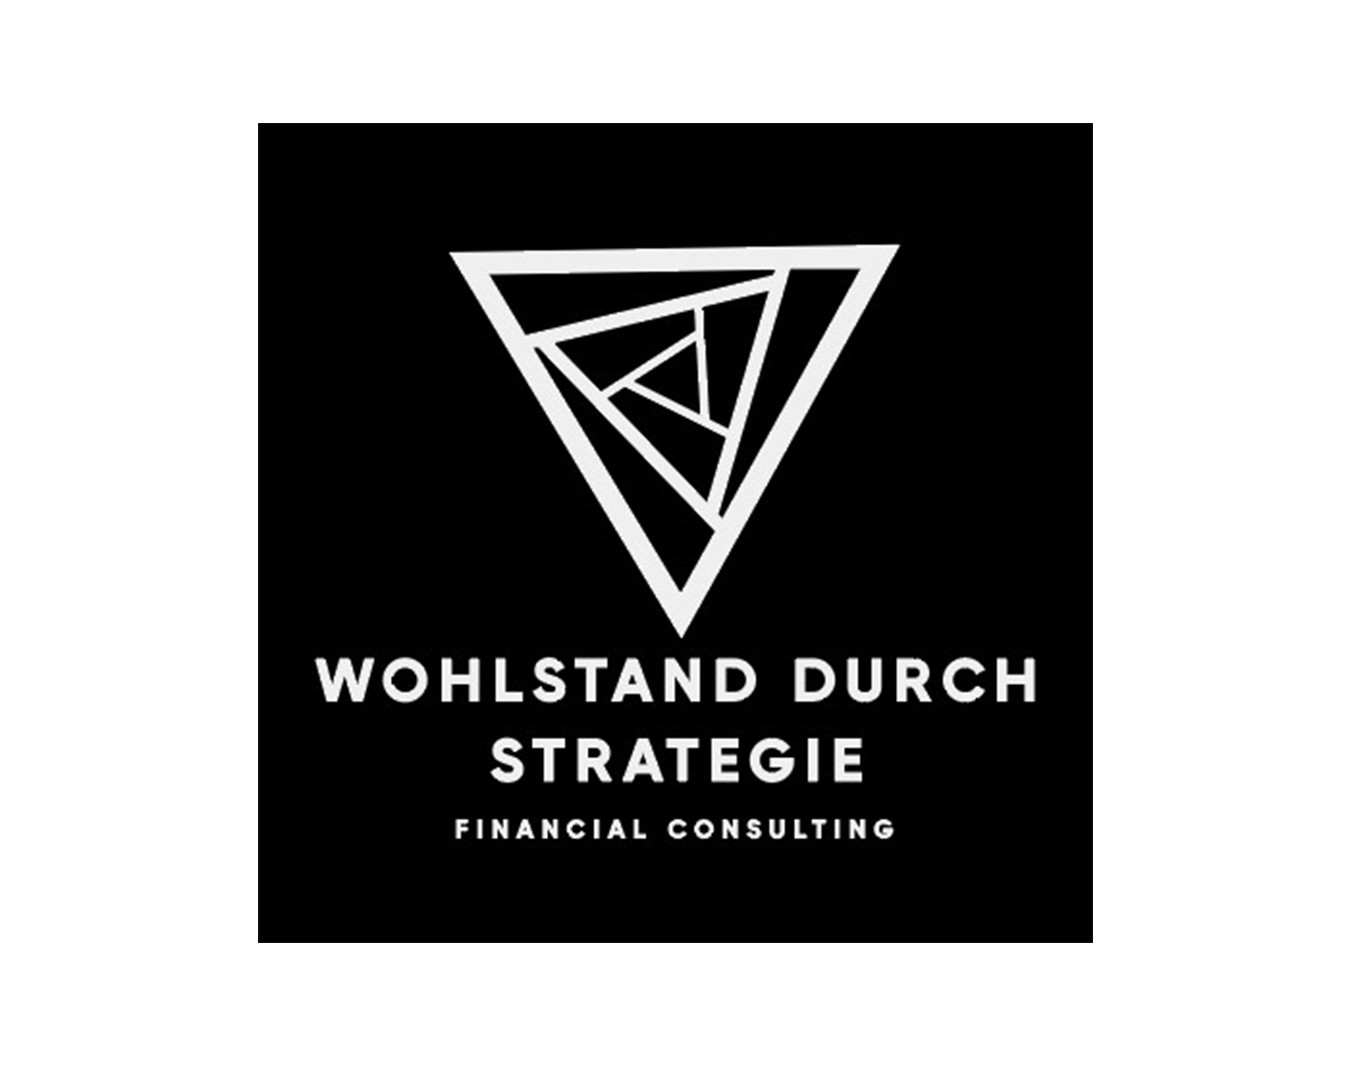 FinancialConsulting